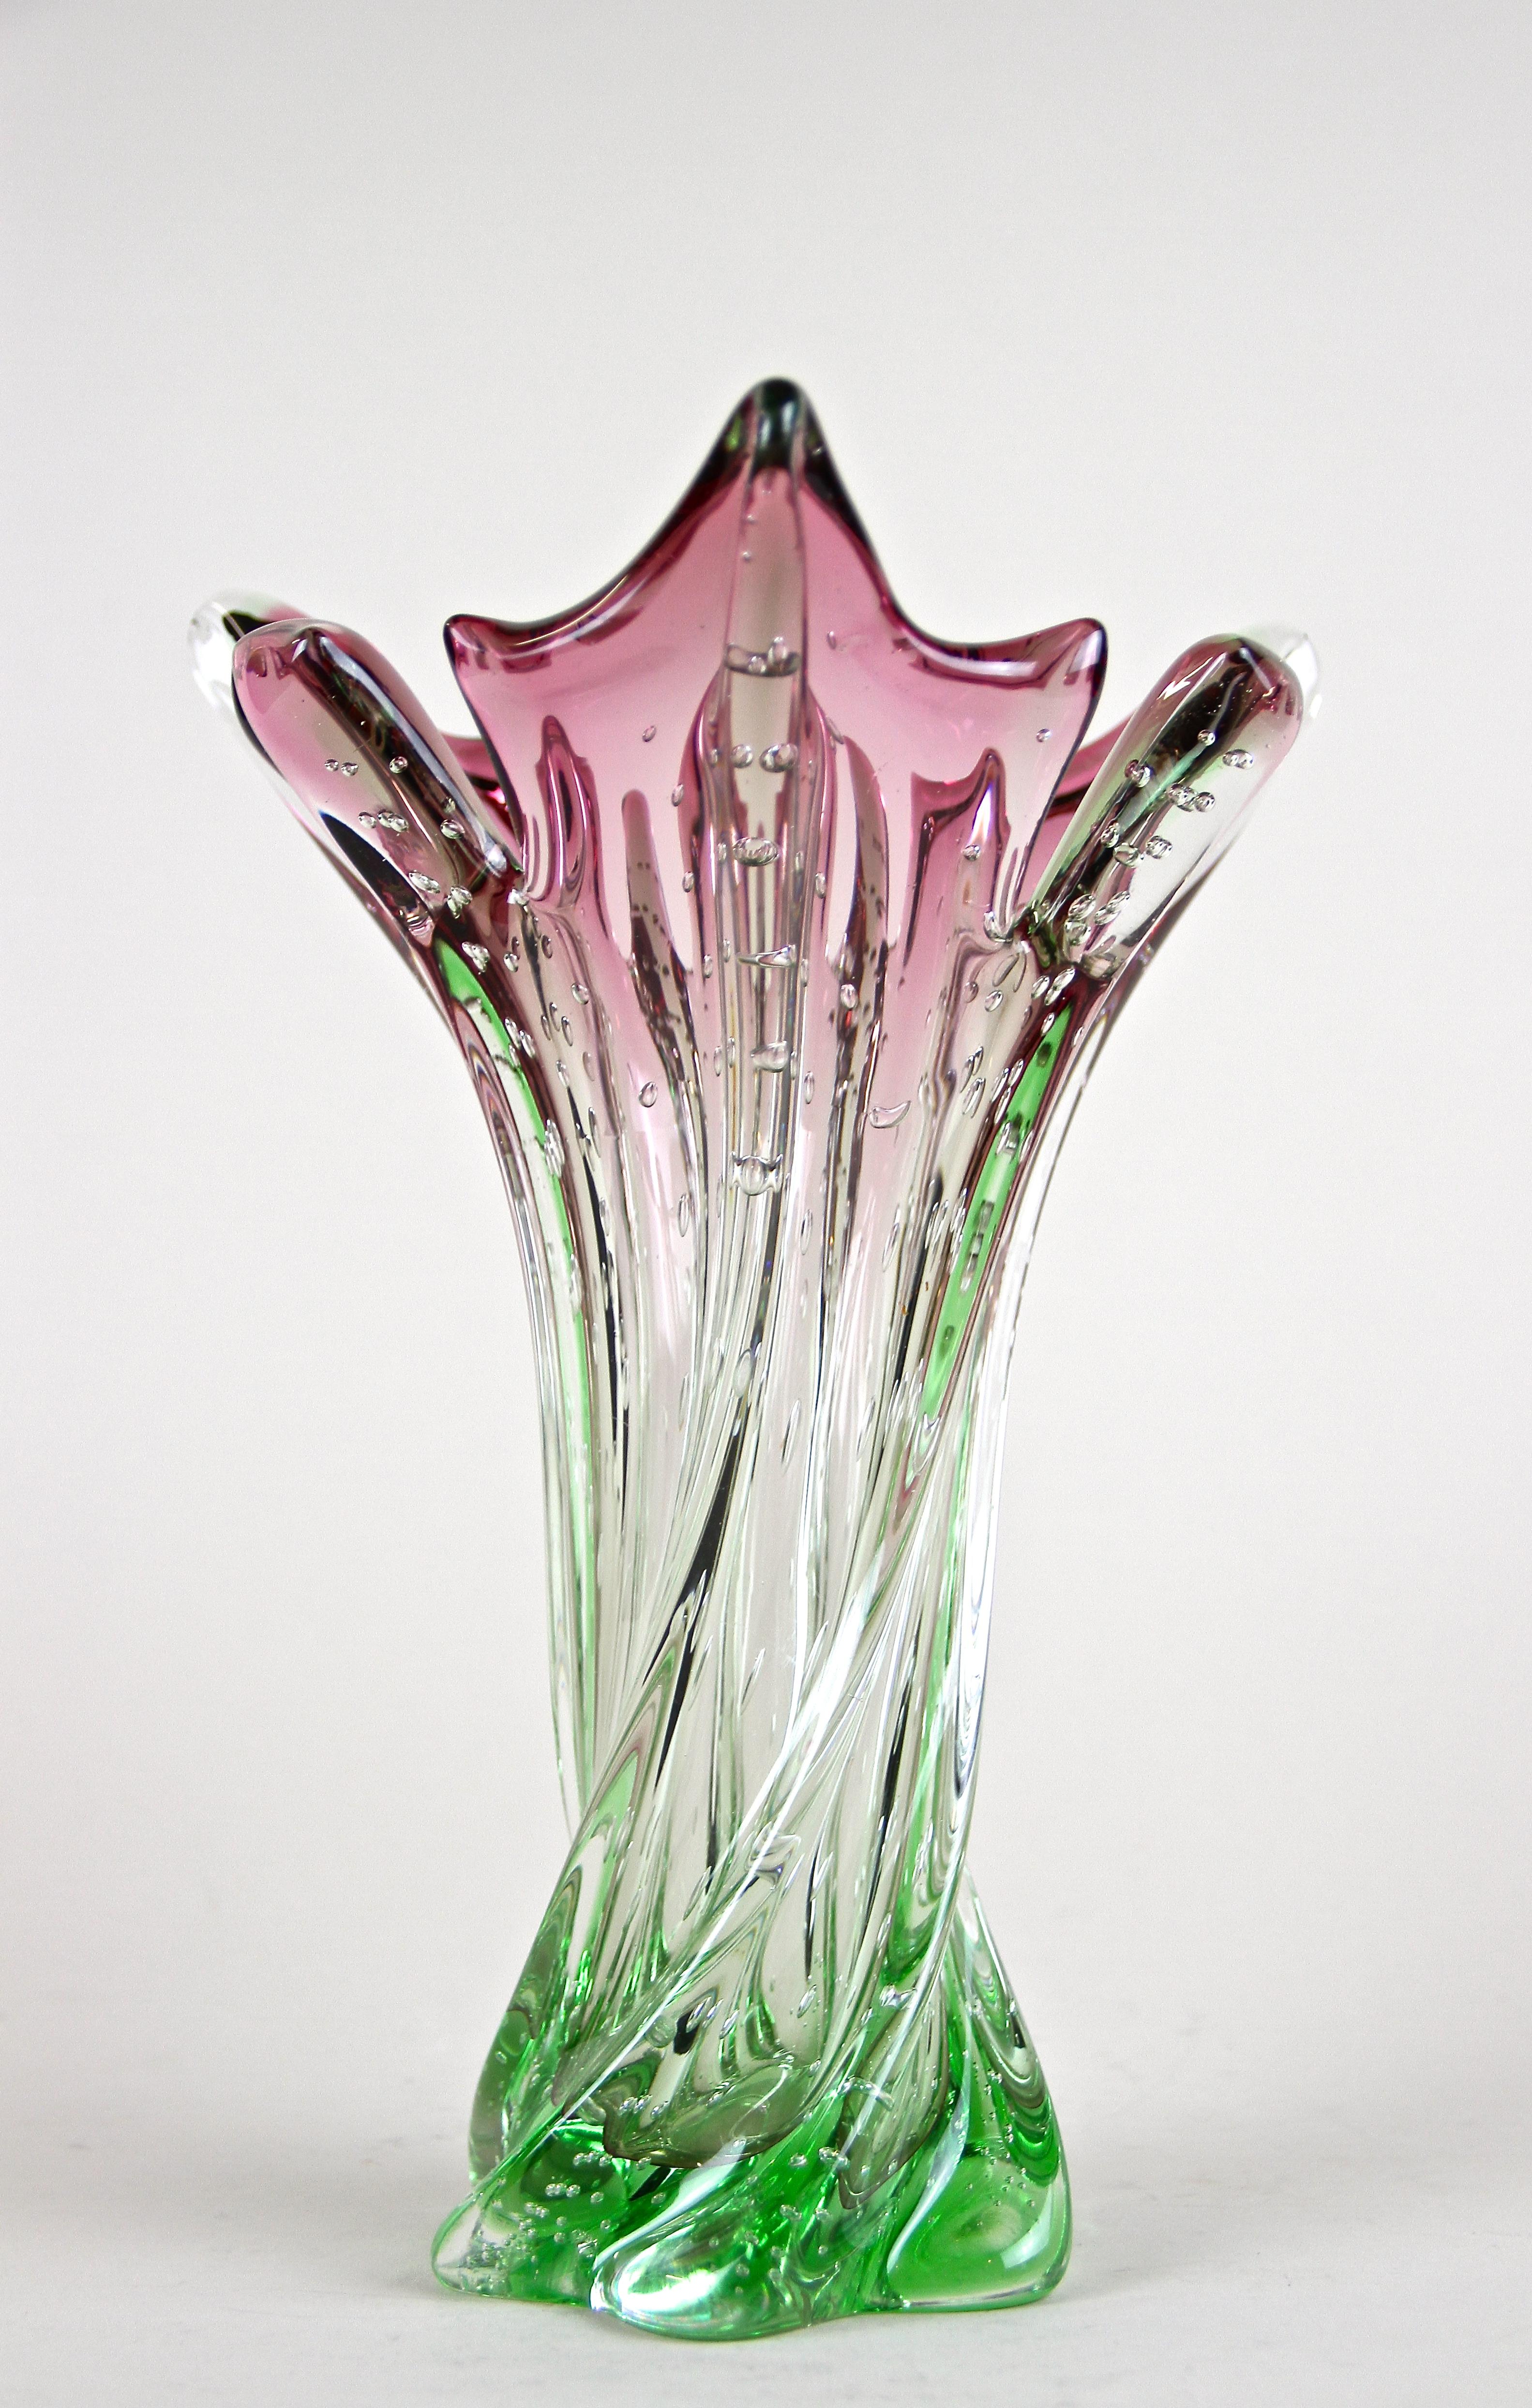 Highly decorative mid century Murano Glass Vase from the renown workshops in Italy around 1960/70. A fantastic shaped, mid-sized vase with twisted body combined with a lovely coloration from pink tones down to a bright green on the base. An